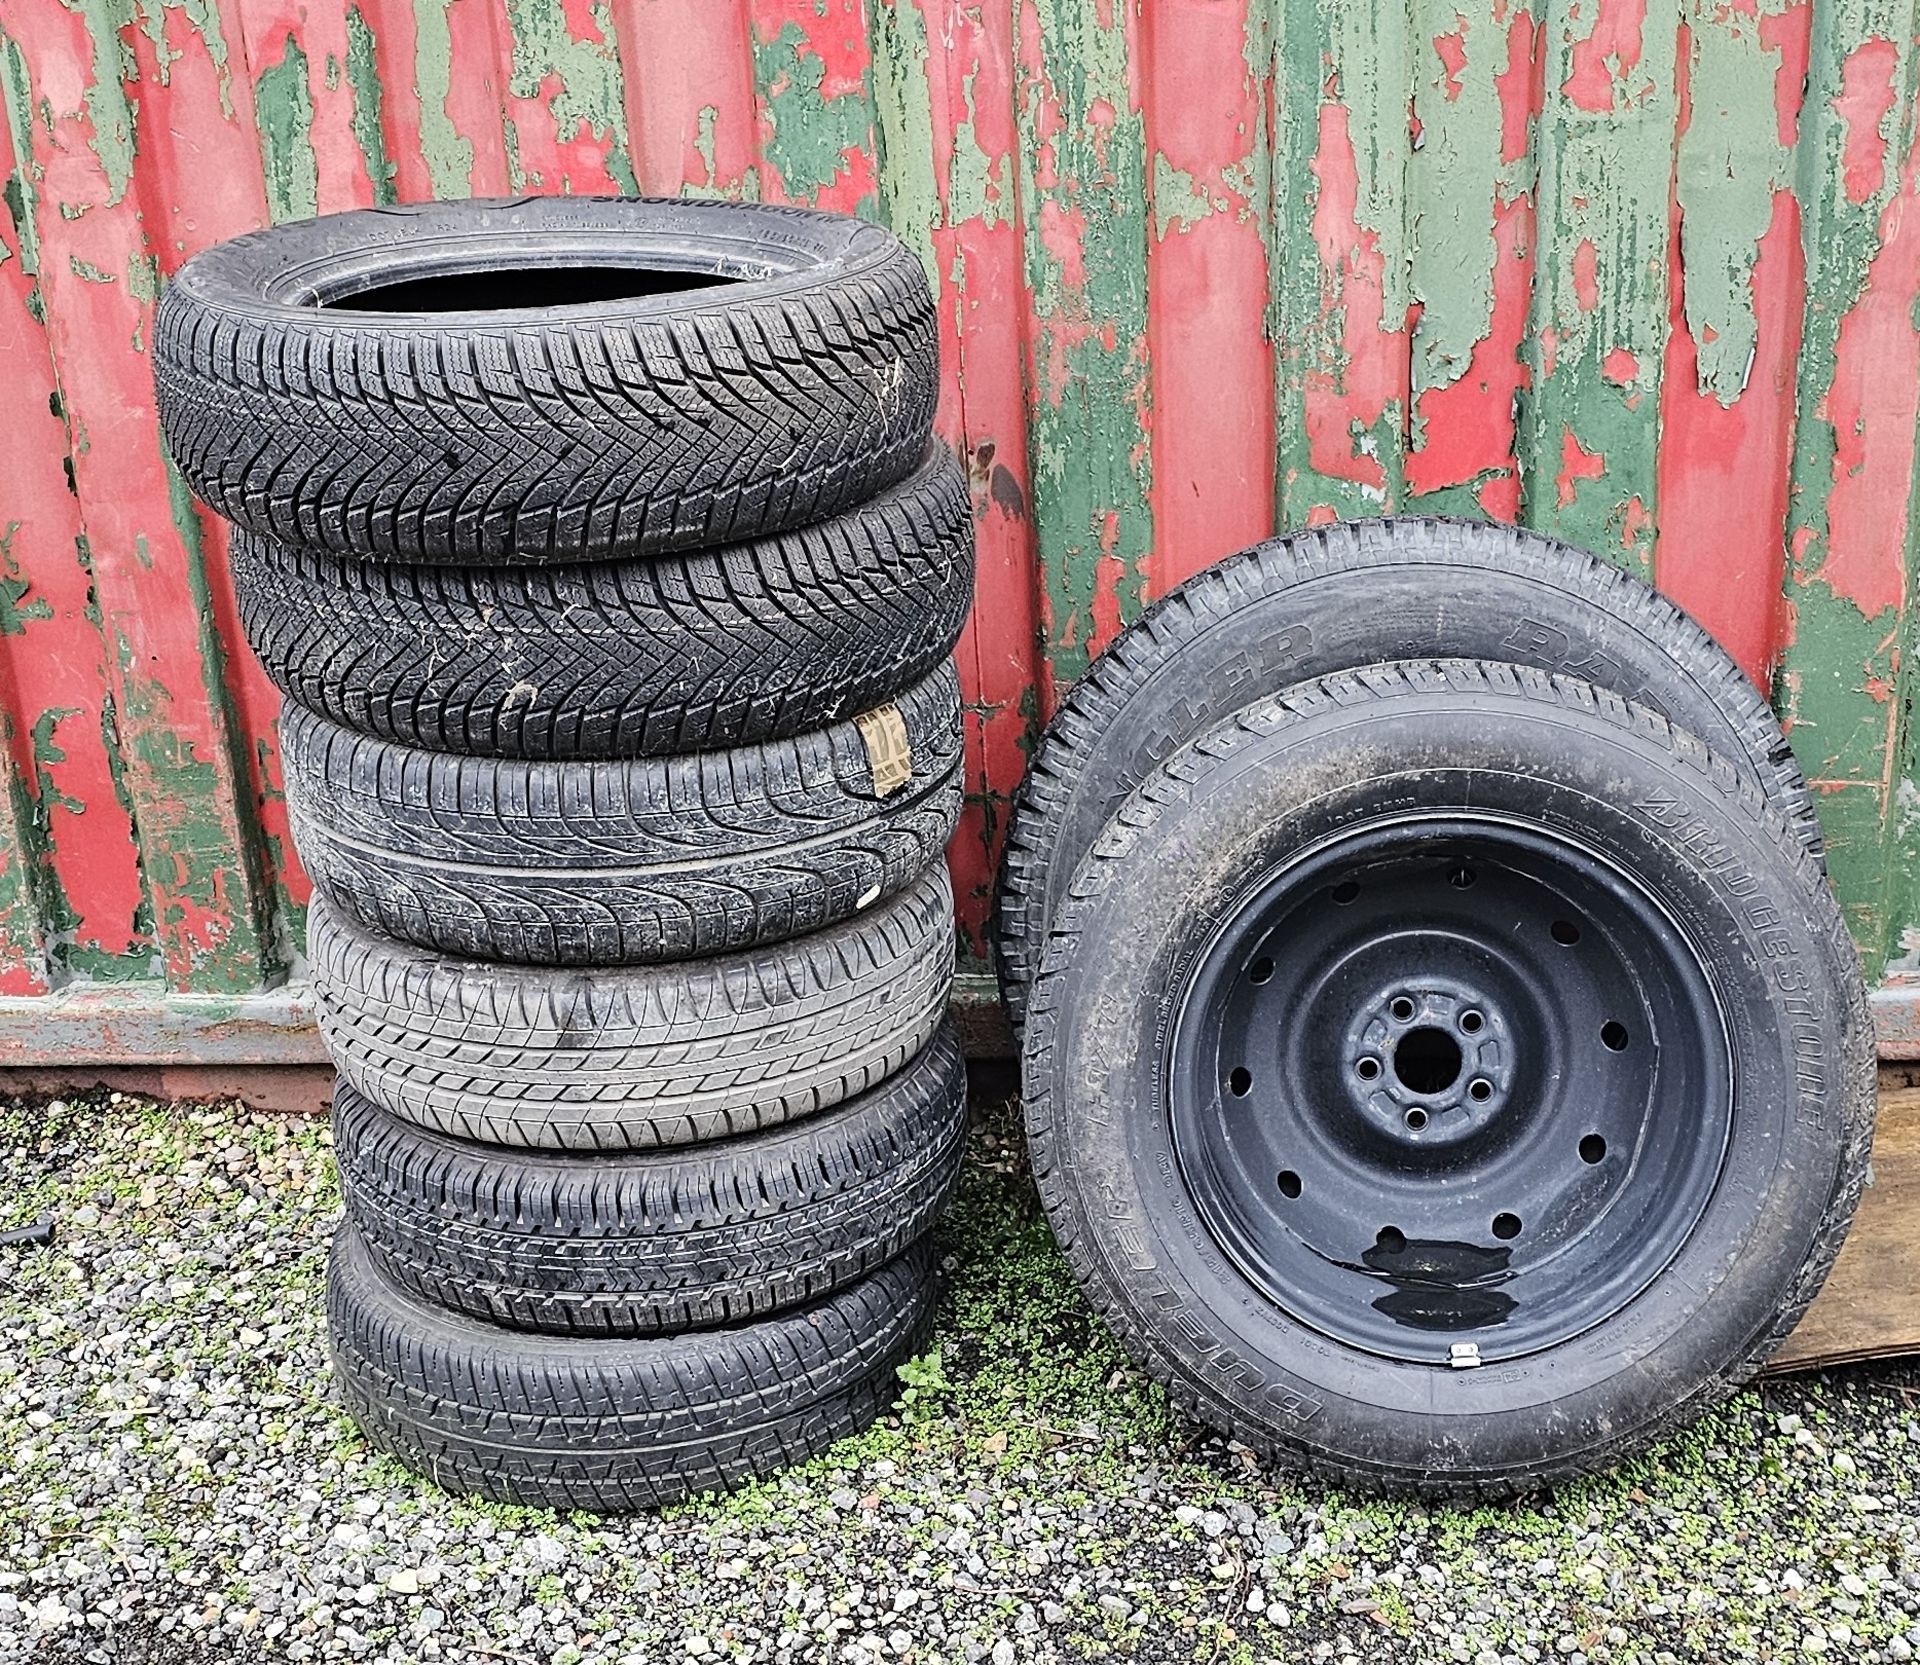 A Good Year Wrangler 205 R16 tyre, and seven other new and used tyres